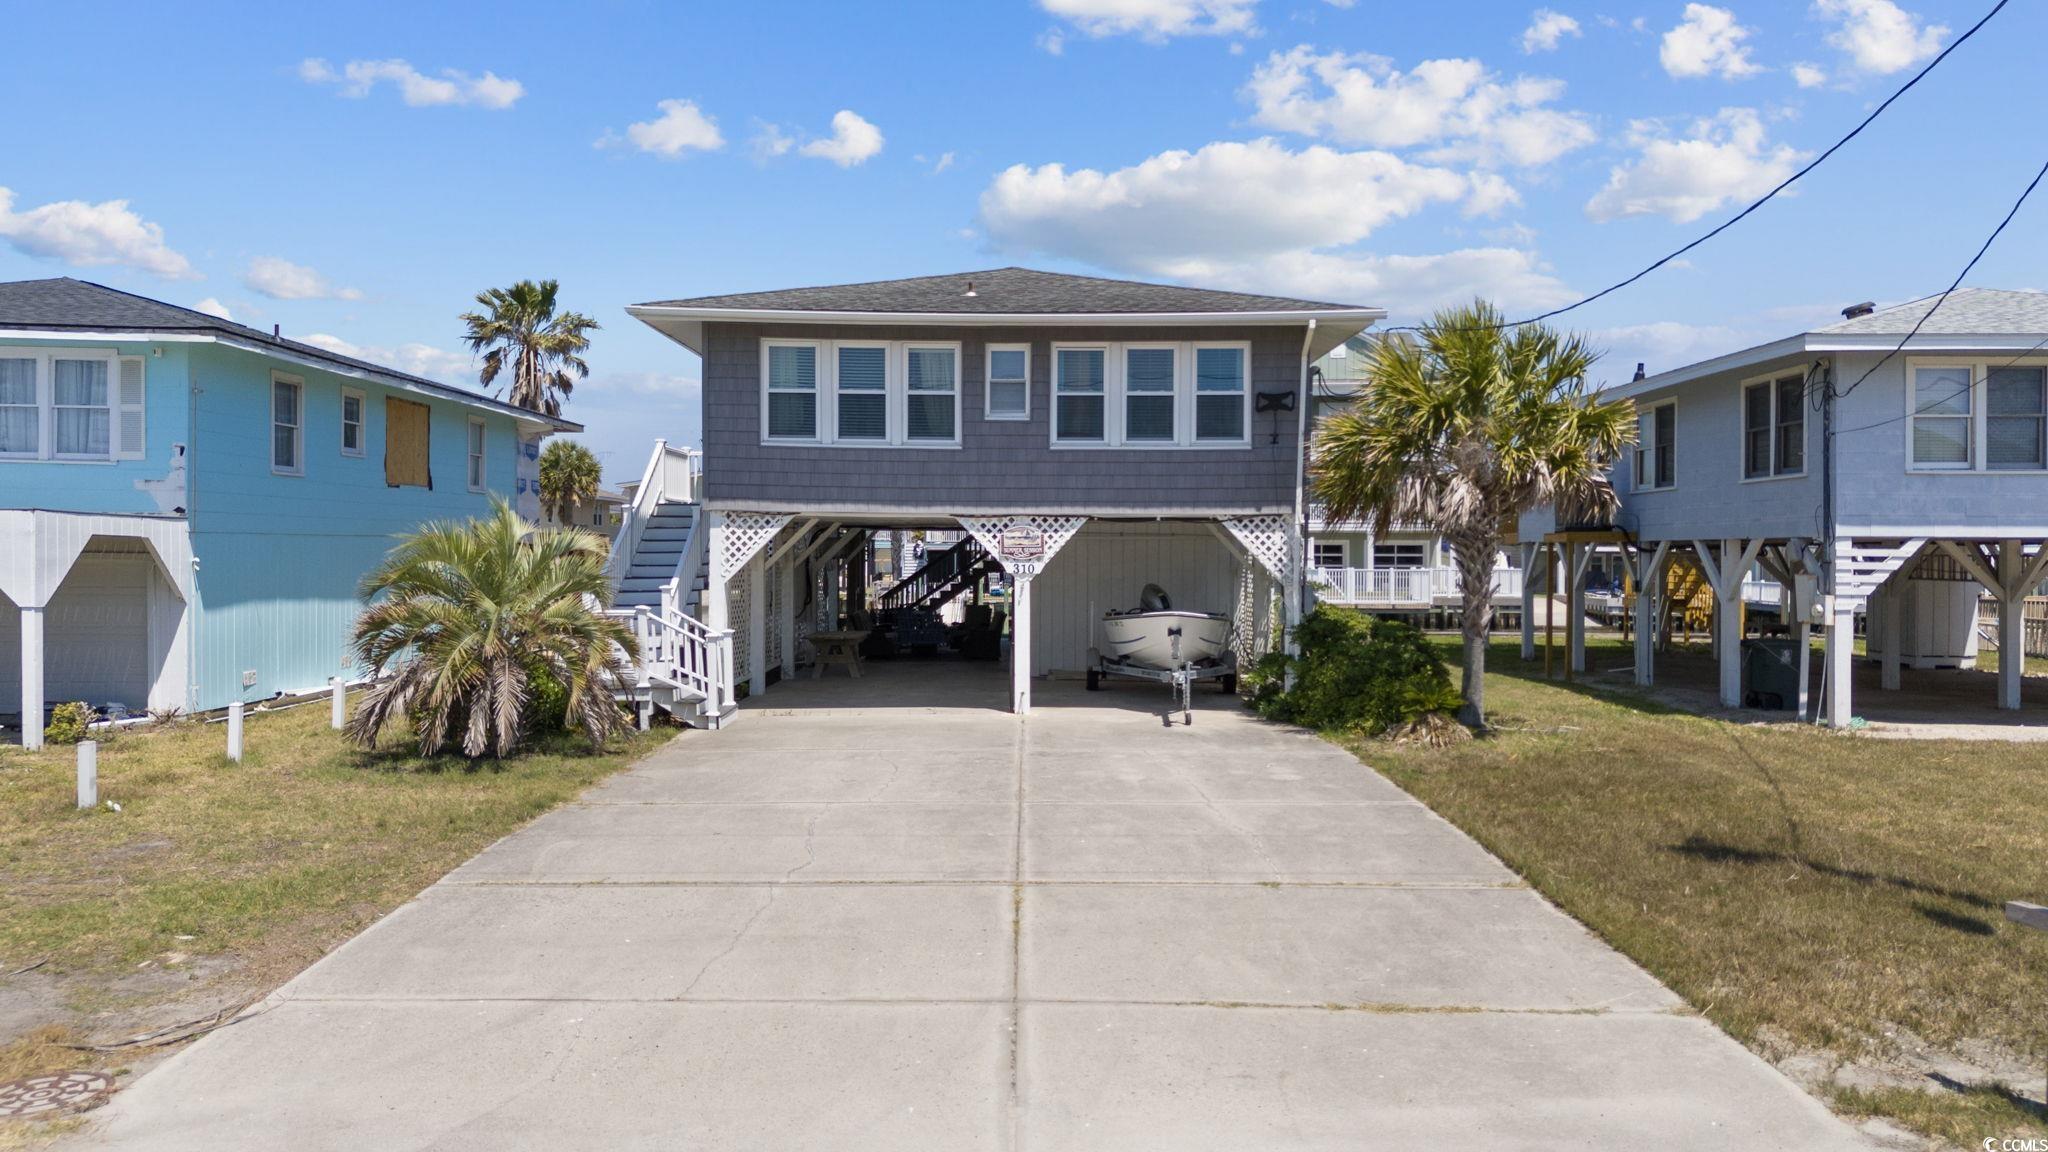 wow! check out this one-of-a-kind channel home in cherry grove with magnificent water views. this four bedroom, three and one half bath home is only two short blocks from the beach. offering a very unique floor plan with two large living spaces, an open kitchen, and split bedroom layout. experience the convenience of effortless access with your own elevator. this home truly caters to your every need. the allure continues as you enjoy serene water views, allowing you to unwind from the comfort of your home. exterior features include floating dock and two large storage rooms. whether you seek a tranquil vacation retreat or an investment property with excellent rental potential, this residence fits the bill perfectly. make this slice of paradise yours today!